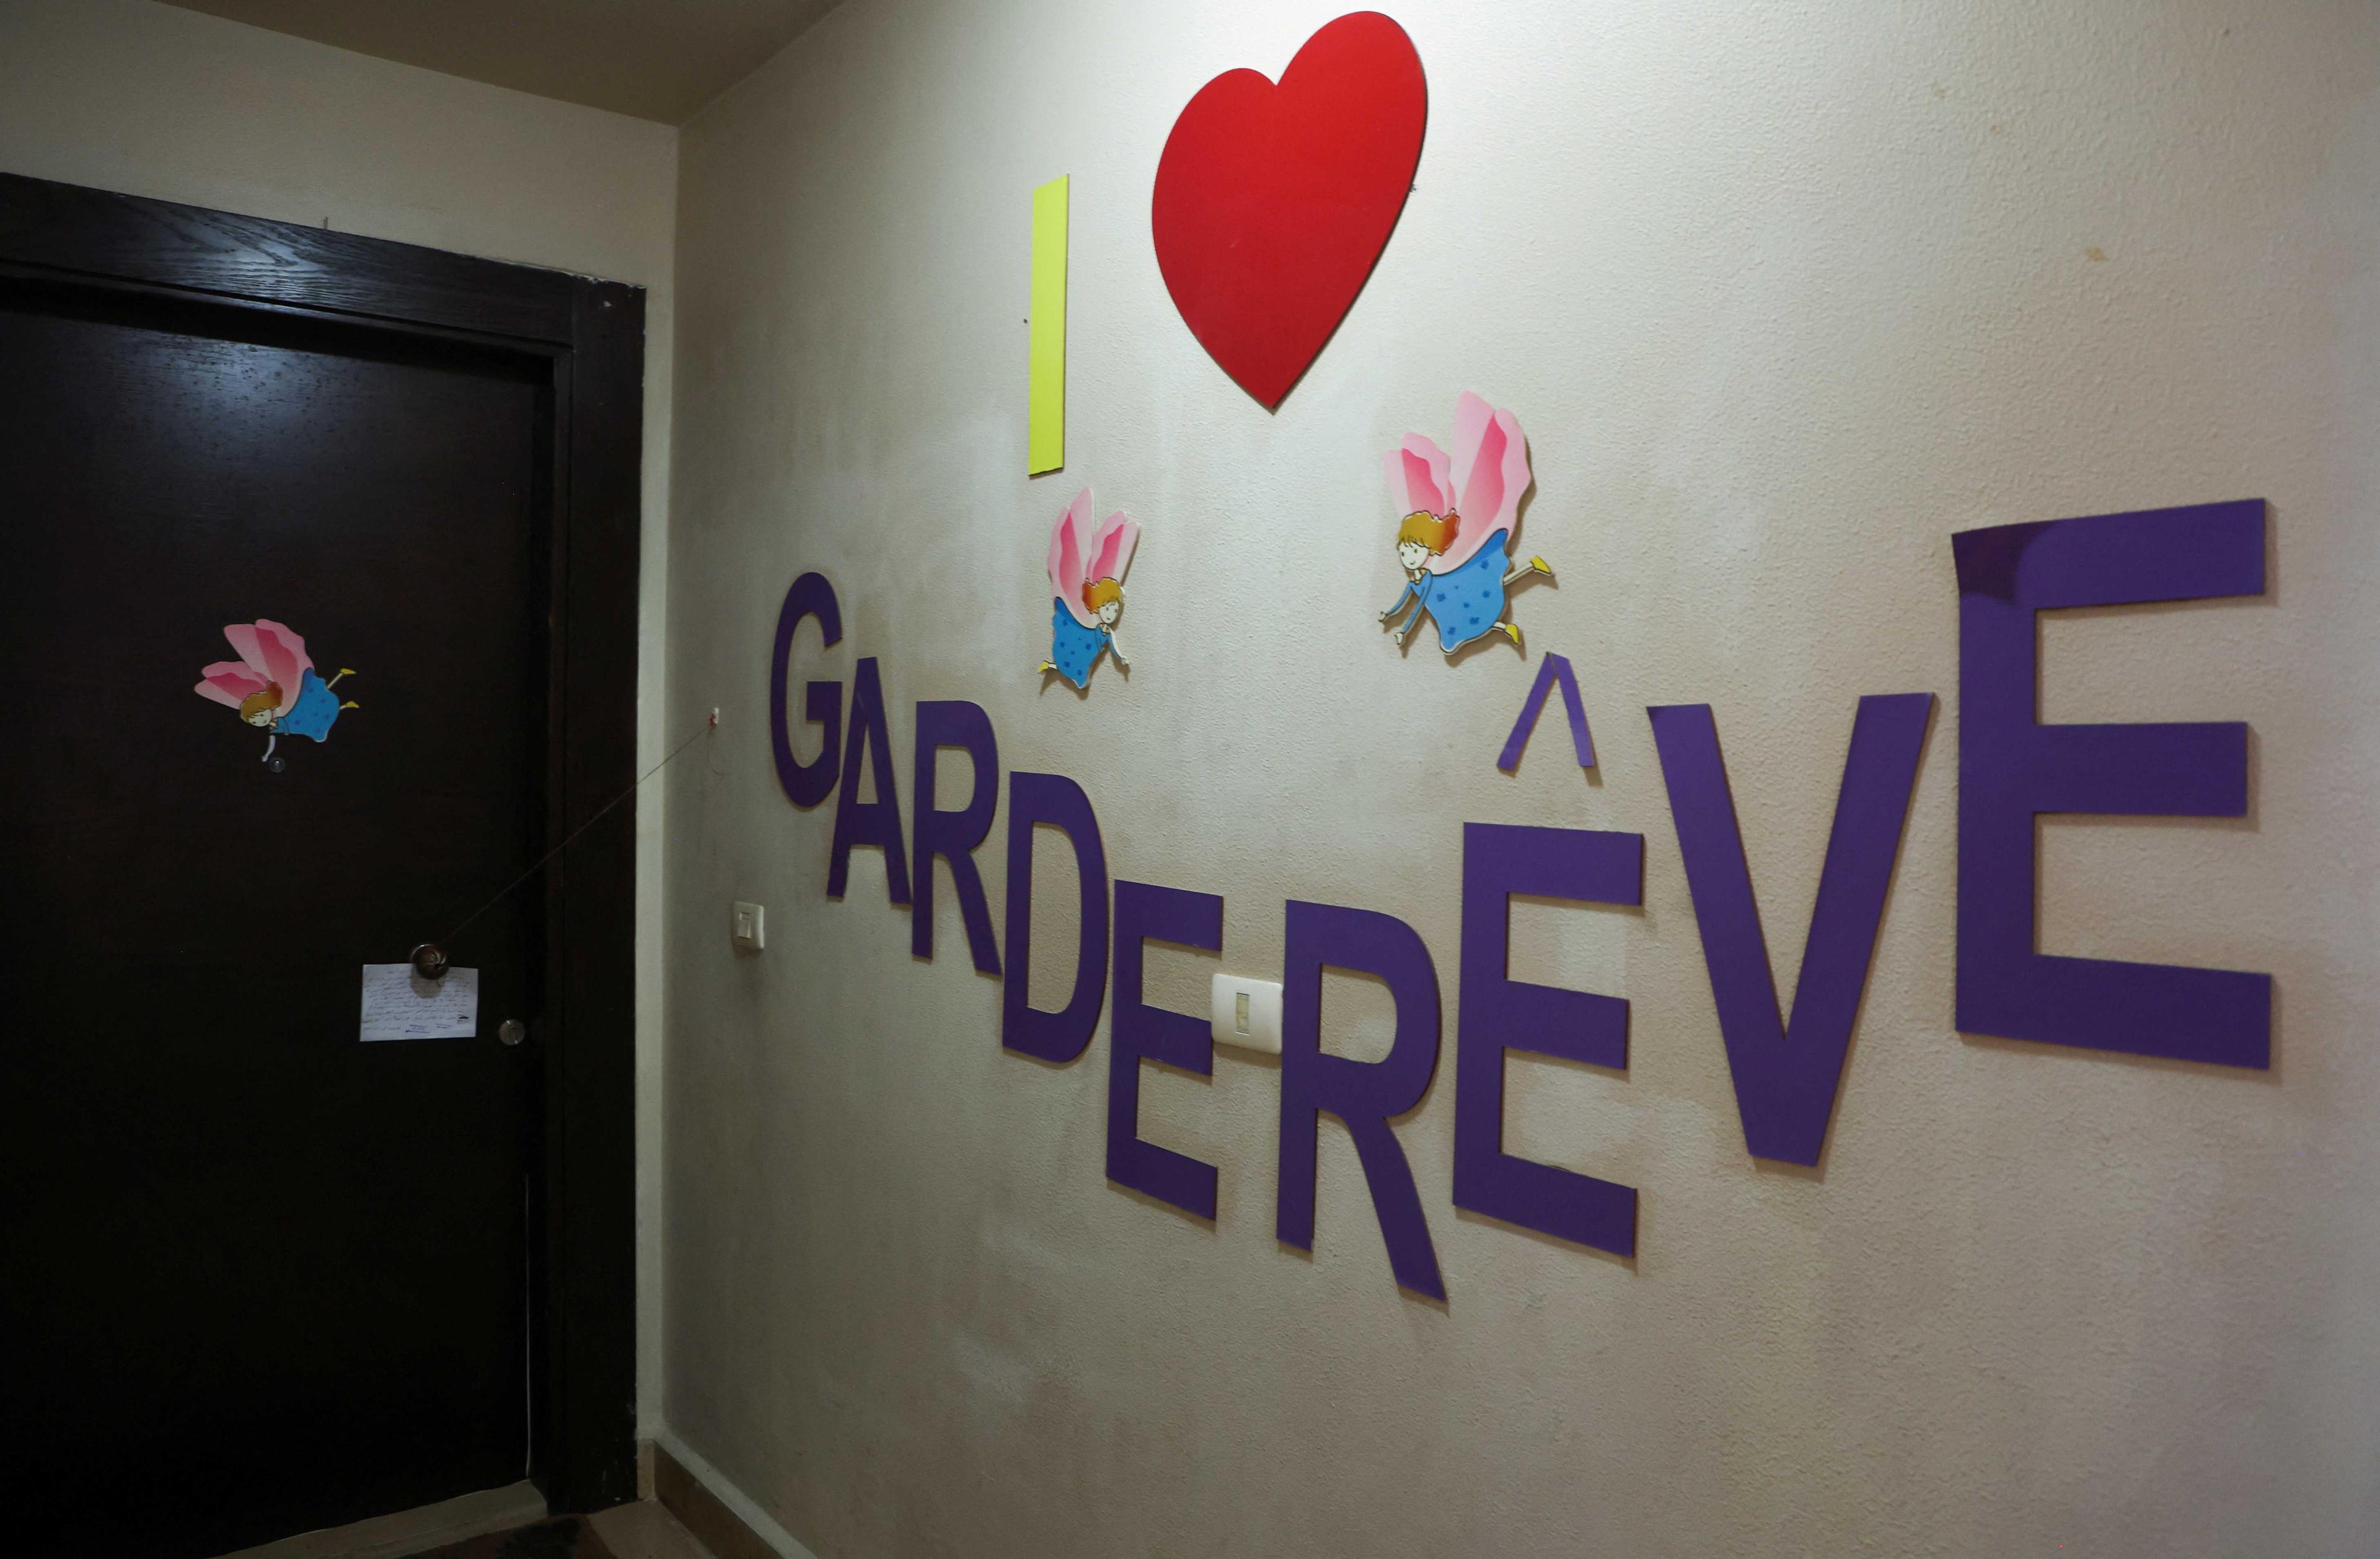 A view shows the entrance of Gardereve daycare inside the building in Jdeideh, Lebanon July 12. Photo: Reuters